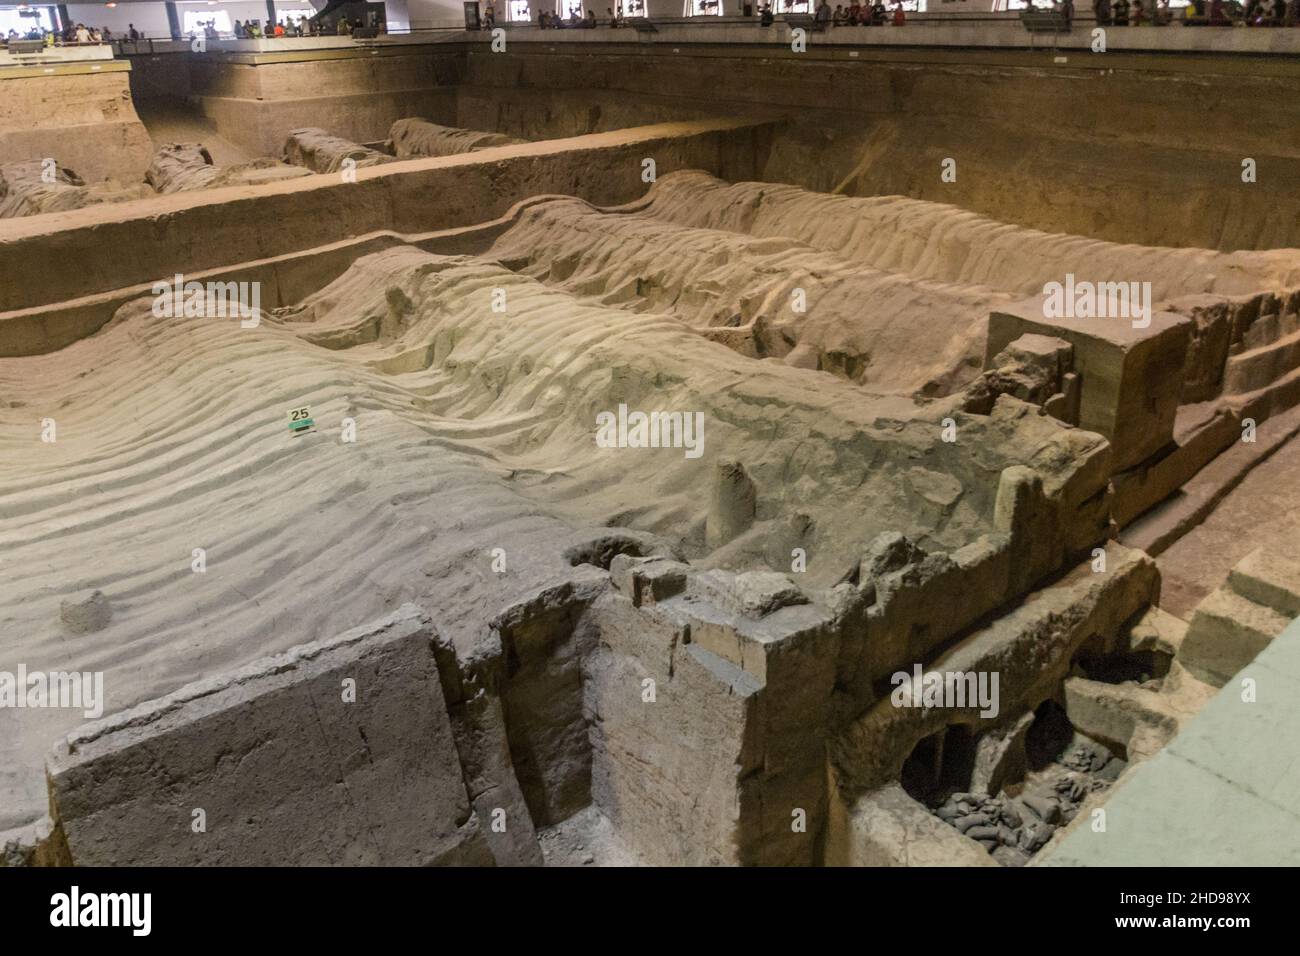 XI'AN, CHINA - AUGUST 6, 2018: View of the Pit 2 of the Army of Terracotta Warriors near Xi'an, Shaanxi province, China Stock Photo